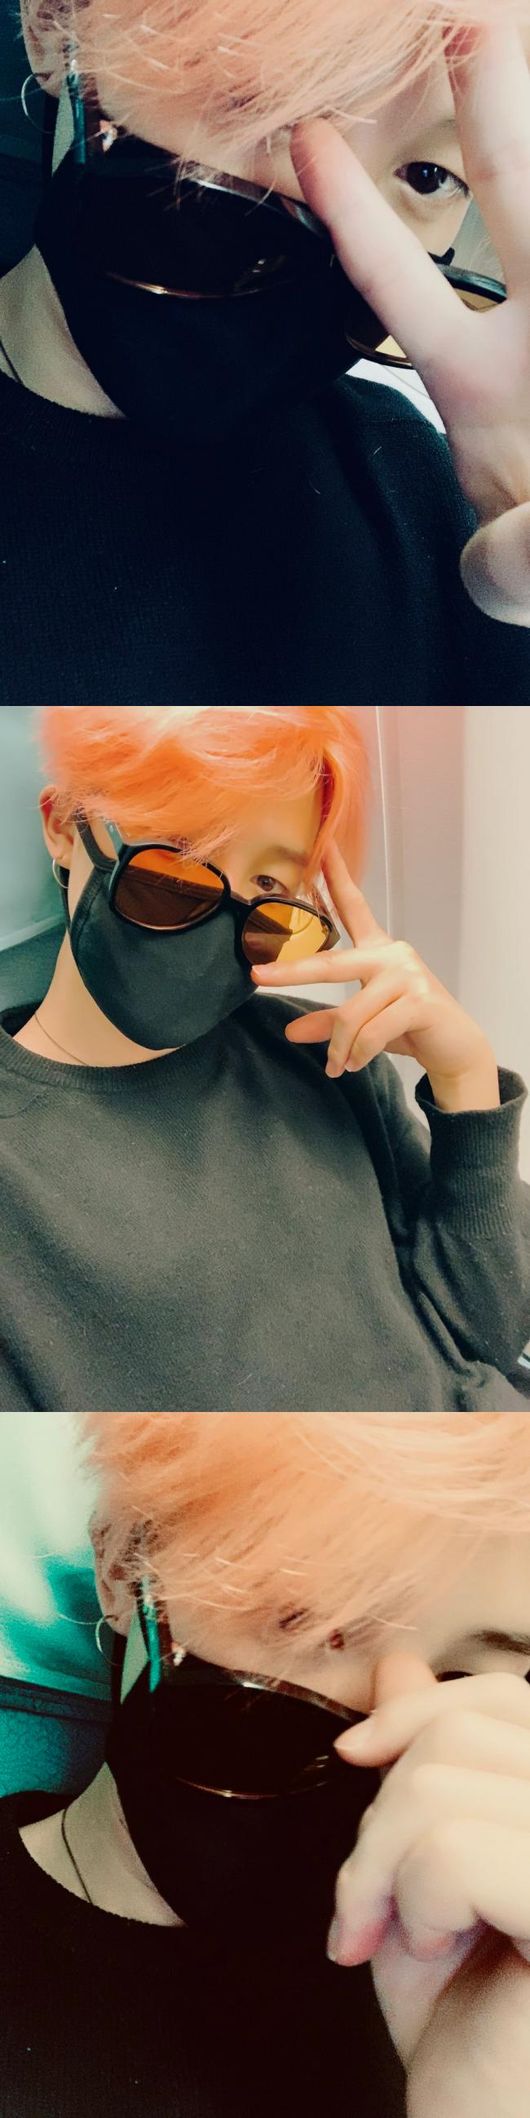 Group BTS member Jimin has released a photo of United States of America arrival certification.Jimin posted photos on the official SNS of BTS on the afternoon of the 30th, along with the article We arrived well and announcing the arrival of United States of America.Jimin posted a night view taken on the plane, a mask and sunglasses, and a picture taken in a comfortable manner.It is BTS that communicates actively with fans in real time.BTS left for United States of America on the 29th to attend the 2019 Billboard Music Awards.They will take to the stage as a performer at the awards ceremony at the MGM Grand Garden Arena in Las Vegas on May 1 (local time).The carbon band was nominated for the Top Social Artist and Top Duo/Group category at the ceremony.BTS official SNS